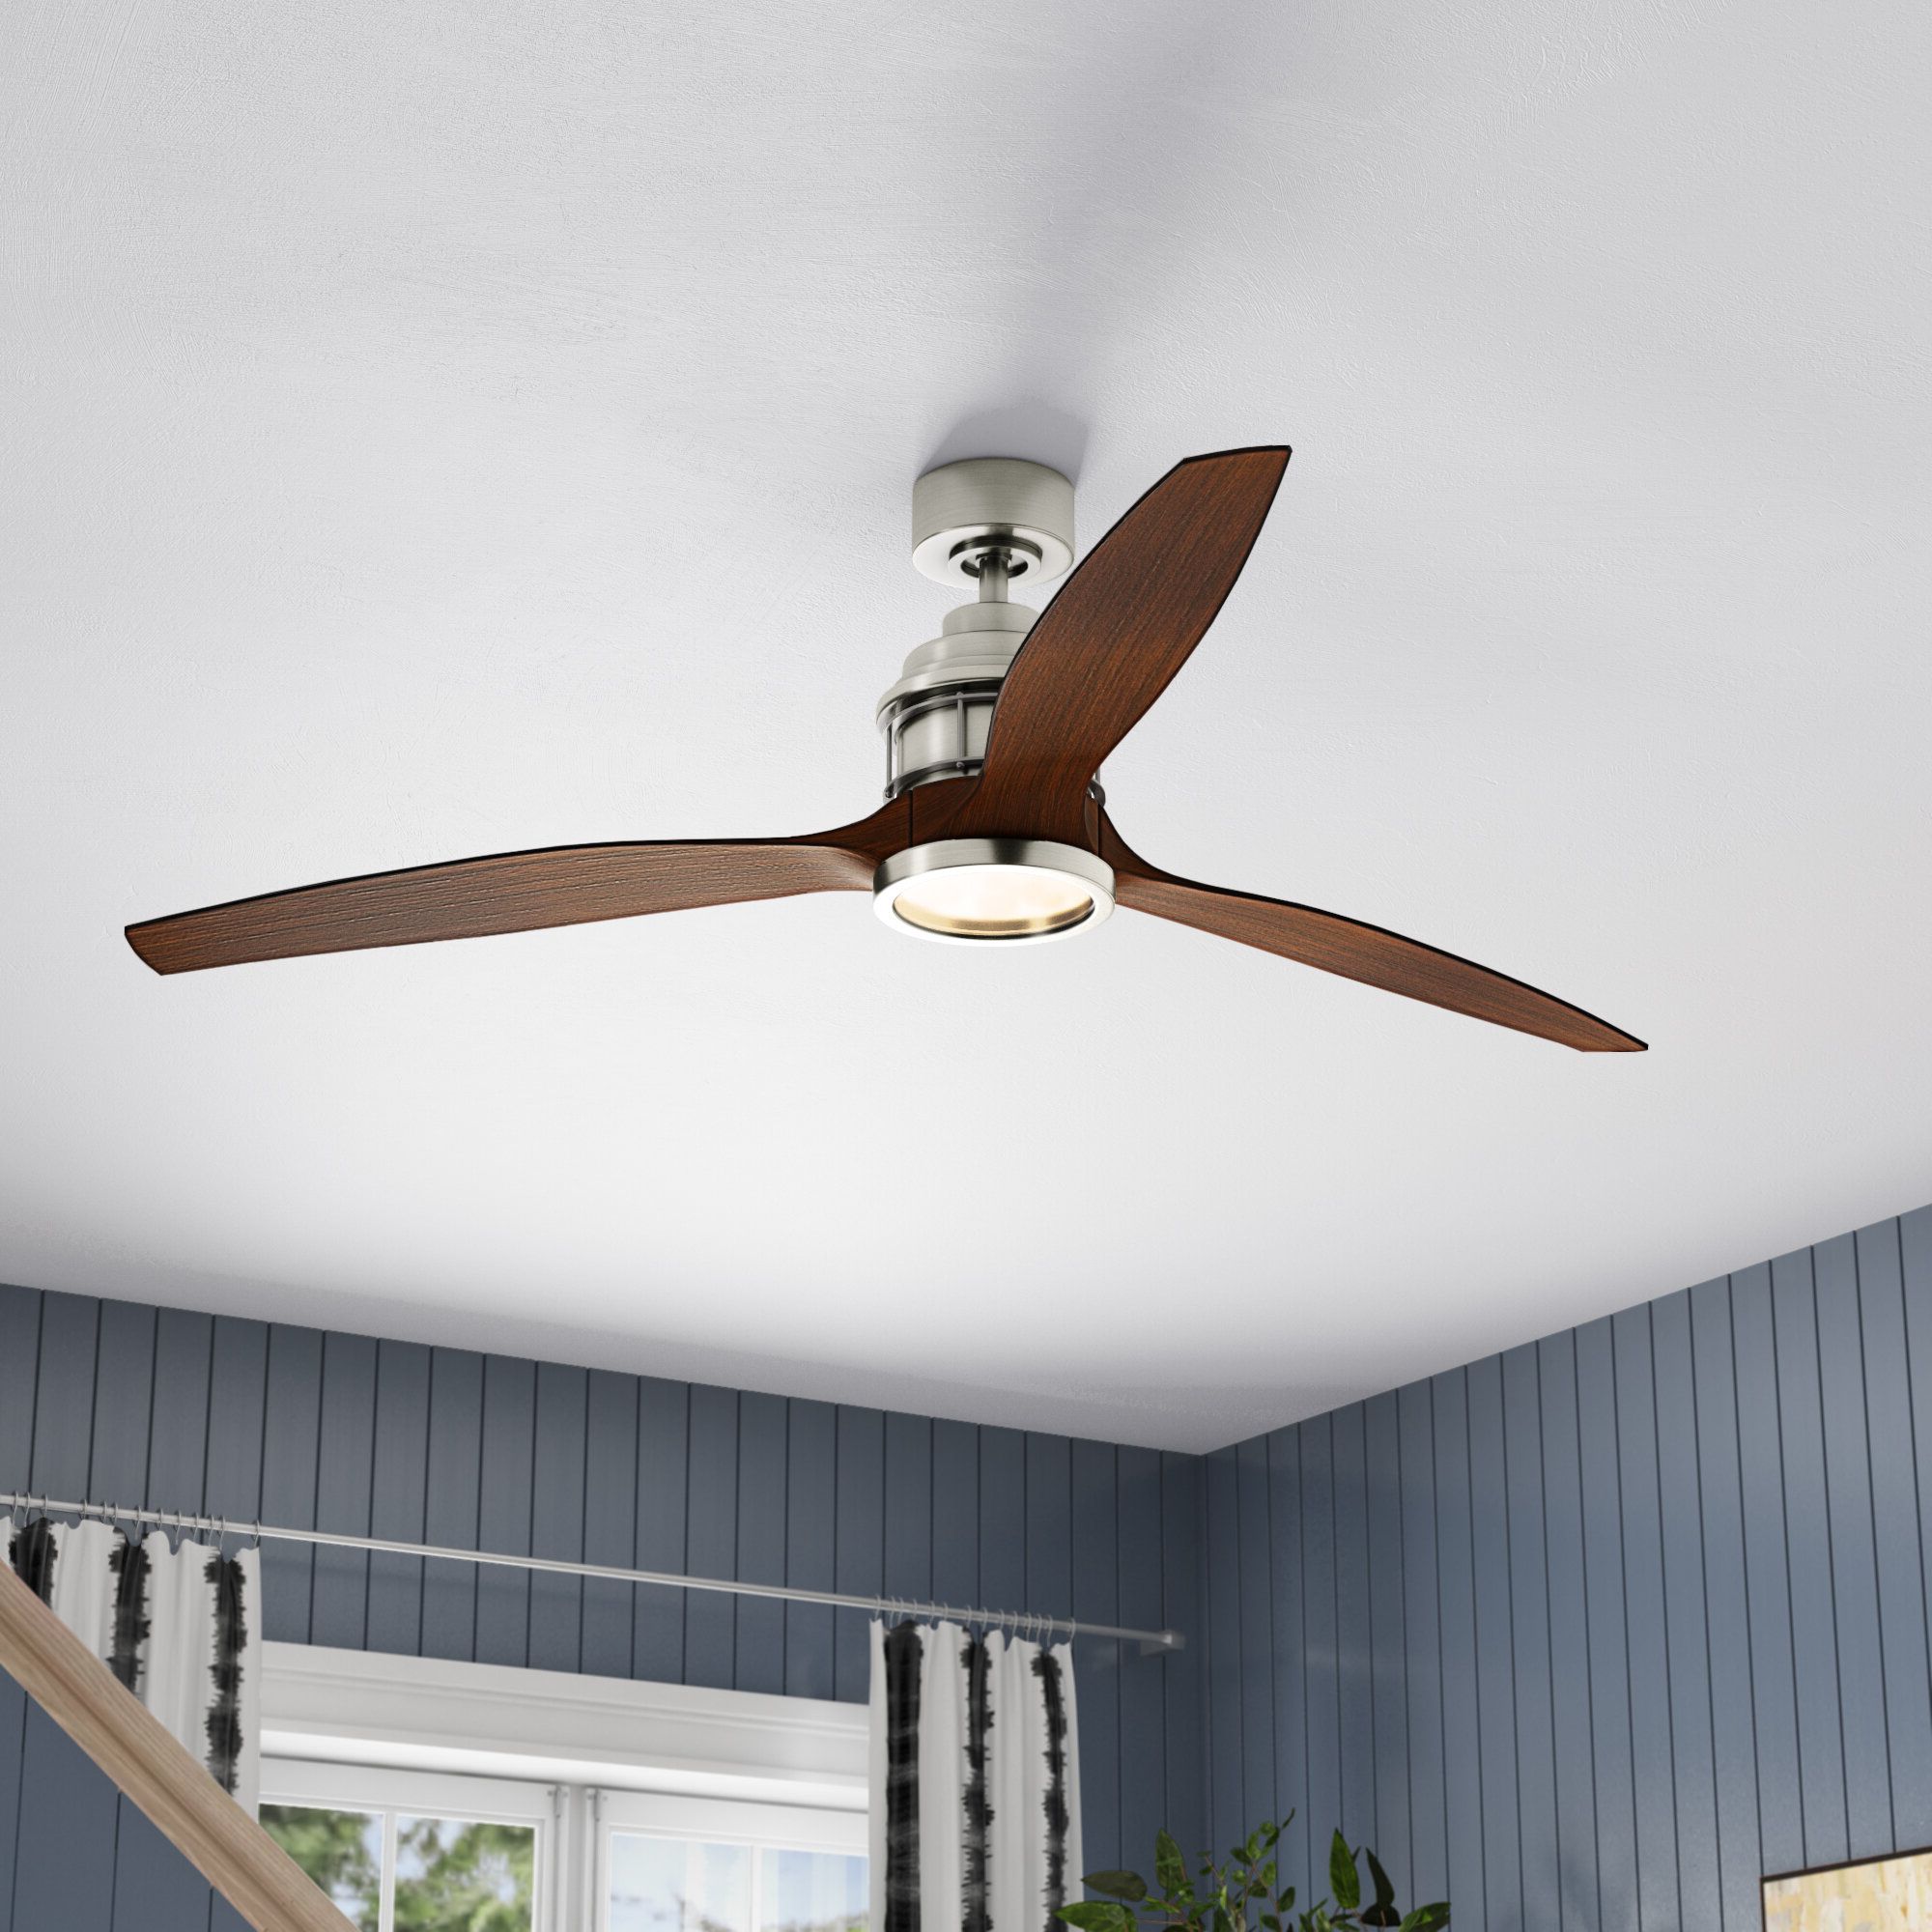 2019 Extremely Large Room Ceiling Fans With Lights You'll Love In Pertaining To Lazlo 3 Blade Ceiling Fans With Remote (View 15 of 20)